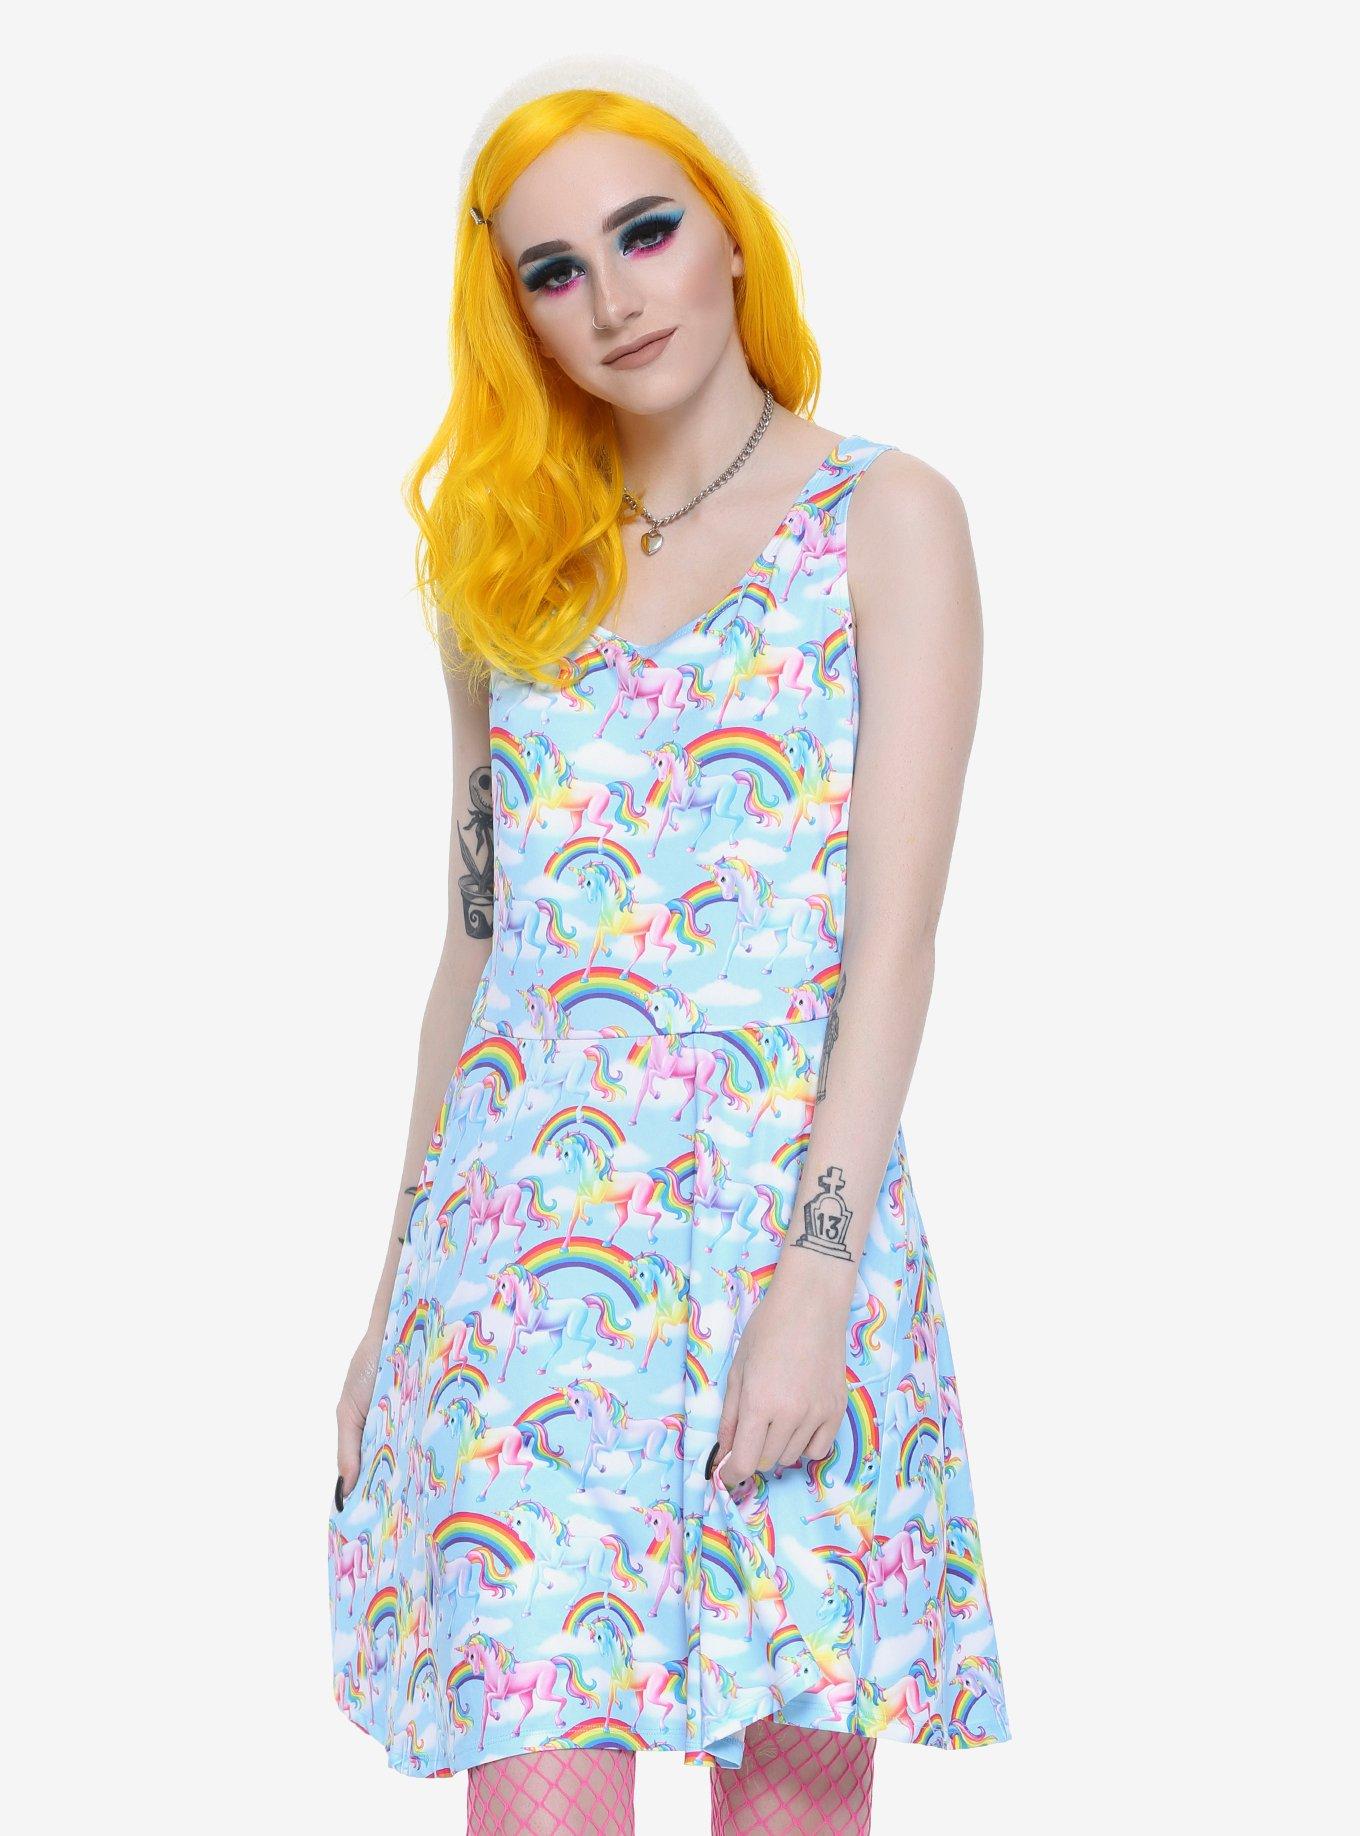 Someone made a skirt out of Lisa Frank stickers and we must own it